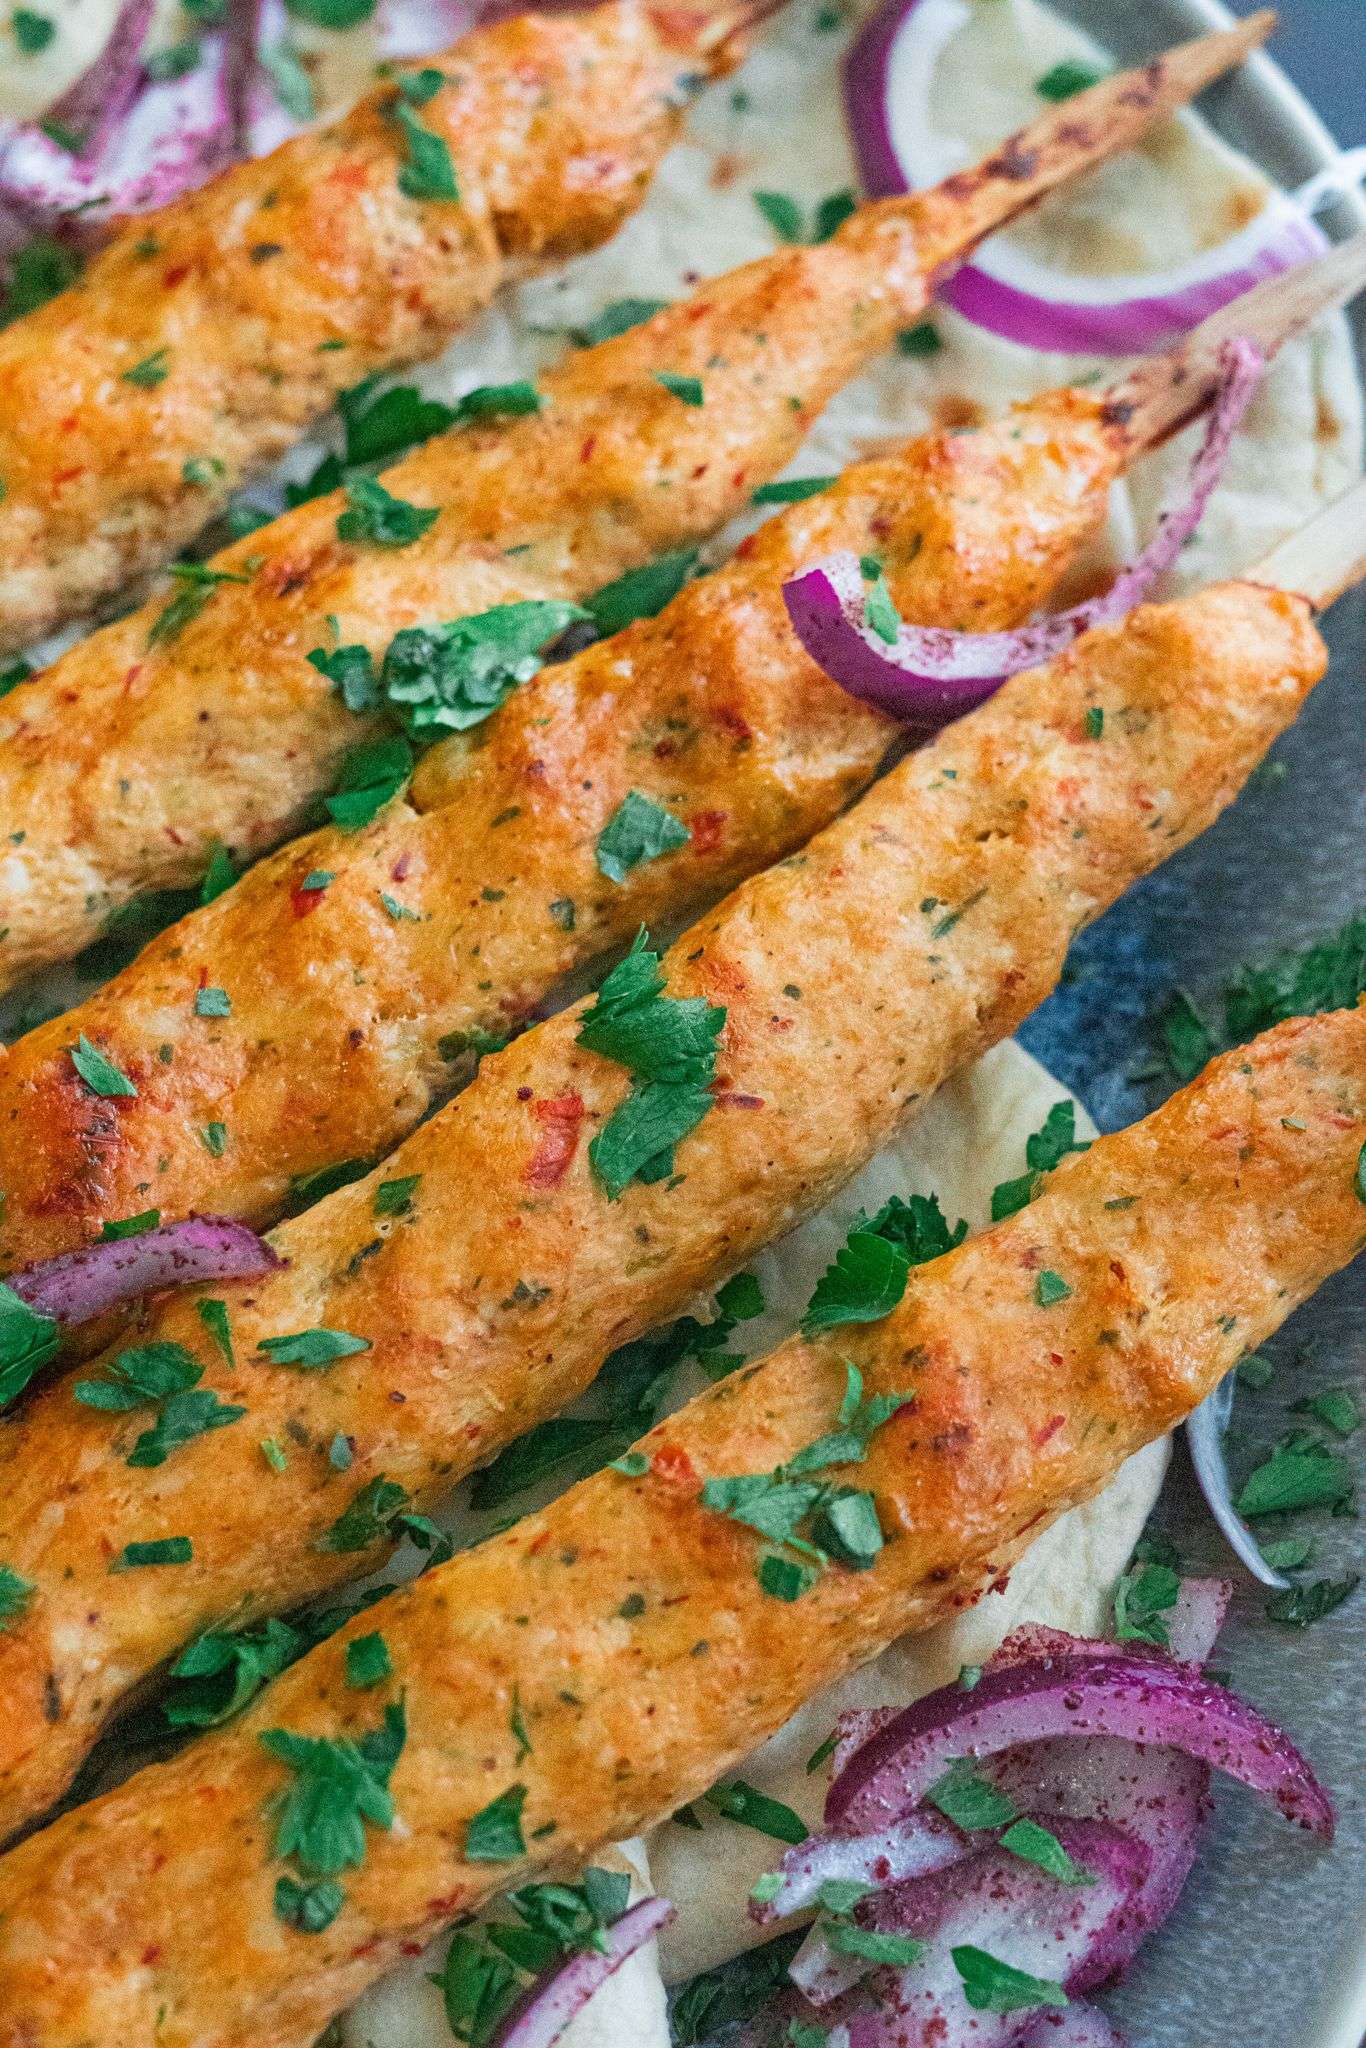 juicy and tender chicken kofta kebabs served with sumac onion salad and finely chopped parsley